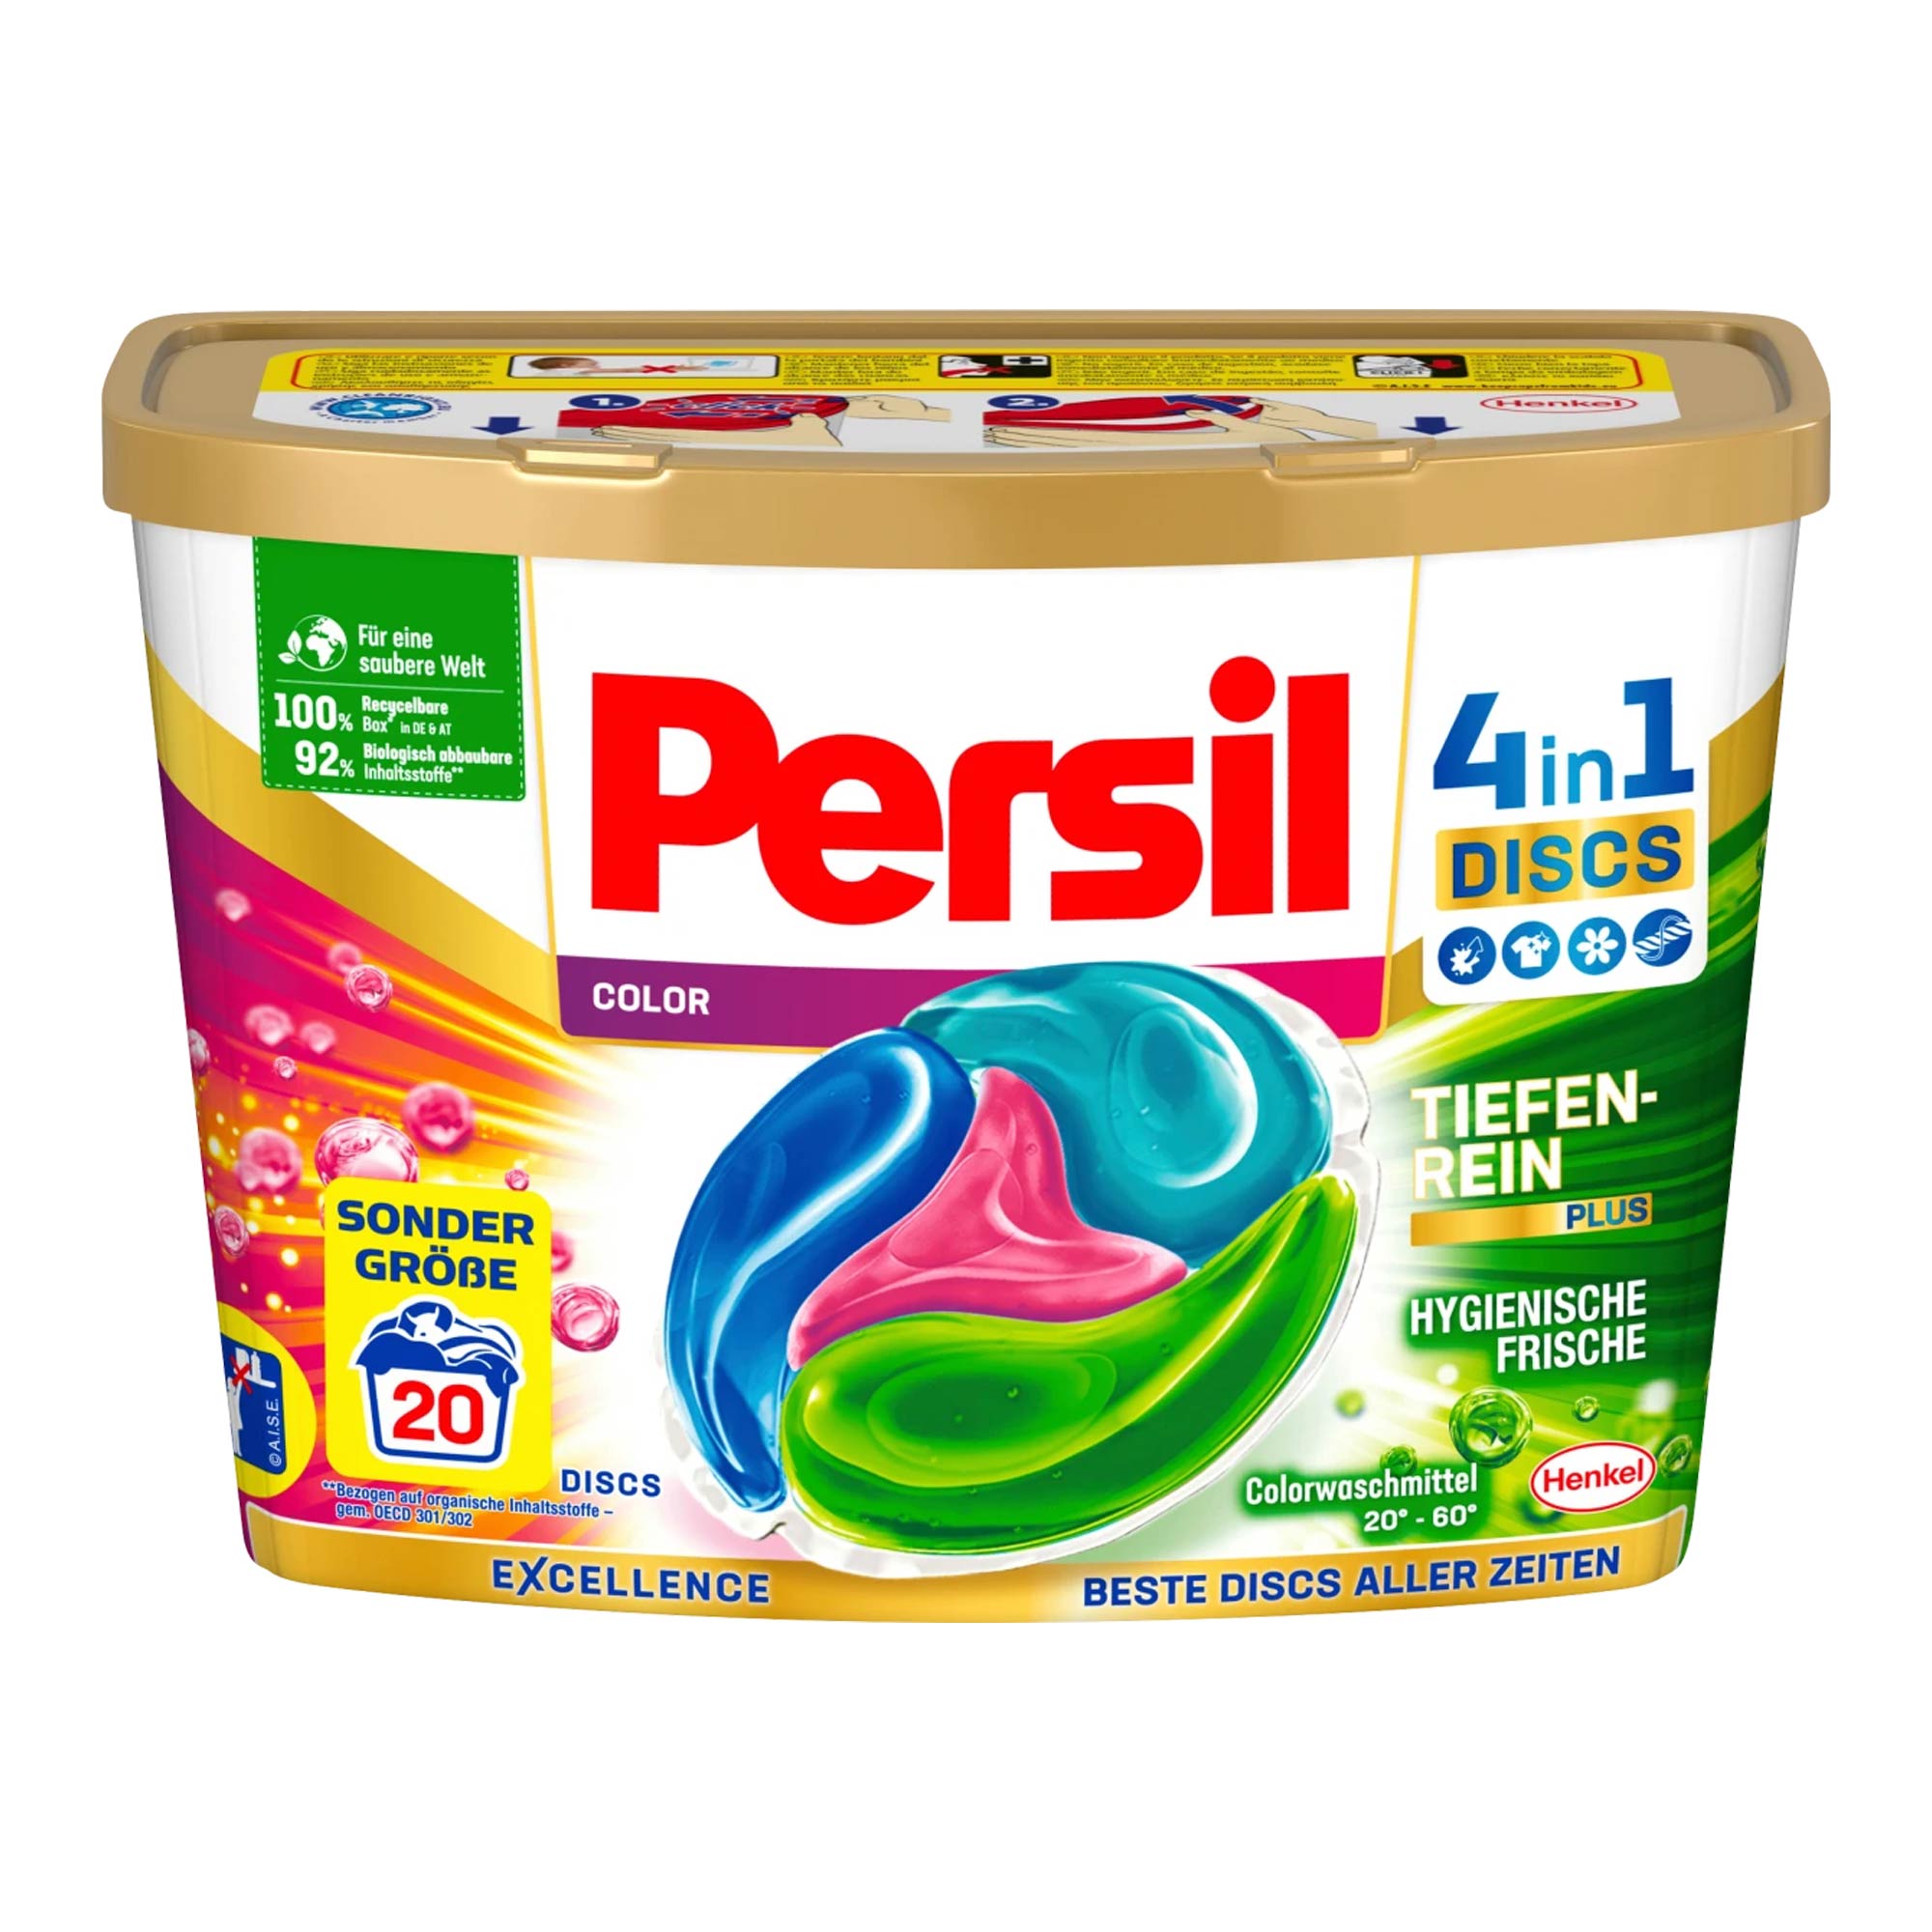 Persil 4in1 Discs Excellence Colorwaschmittel, 20 Wl